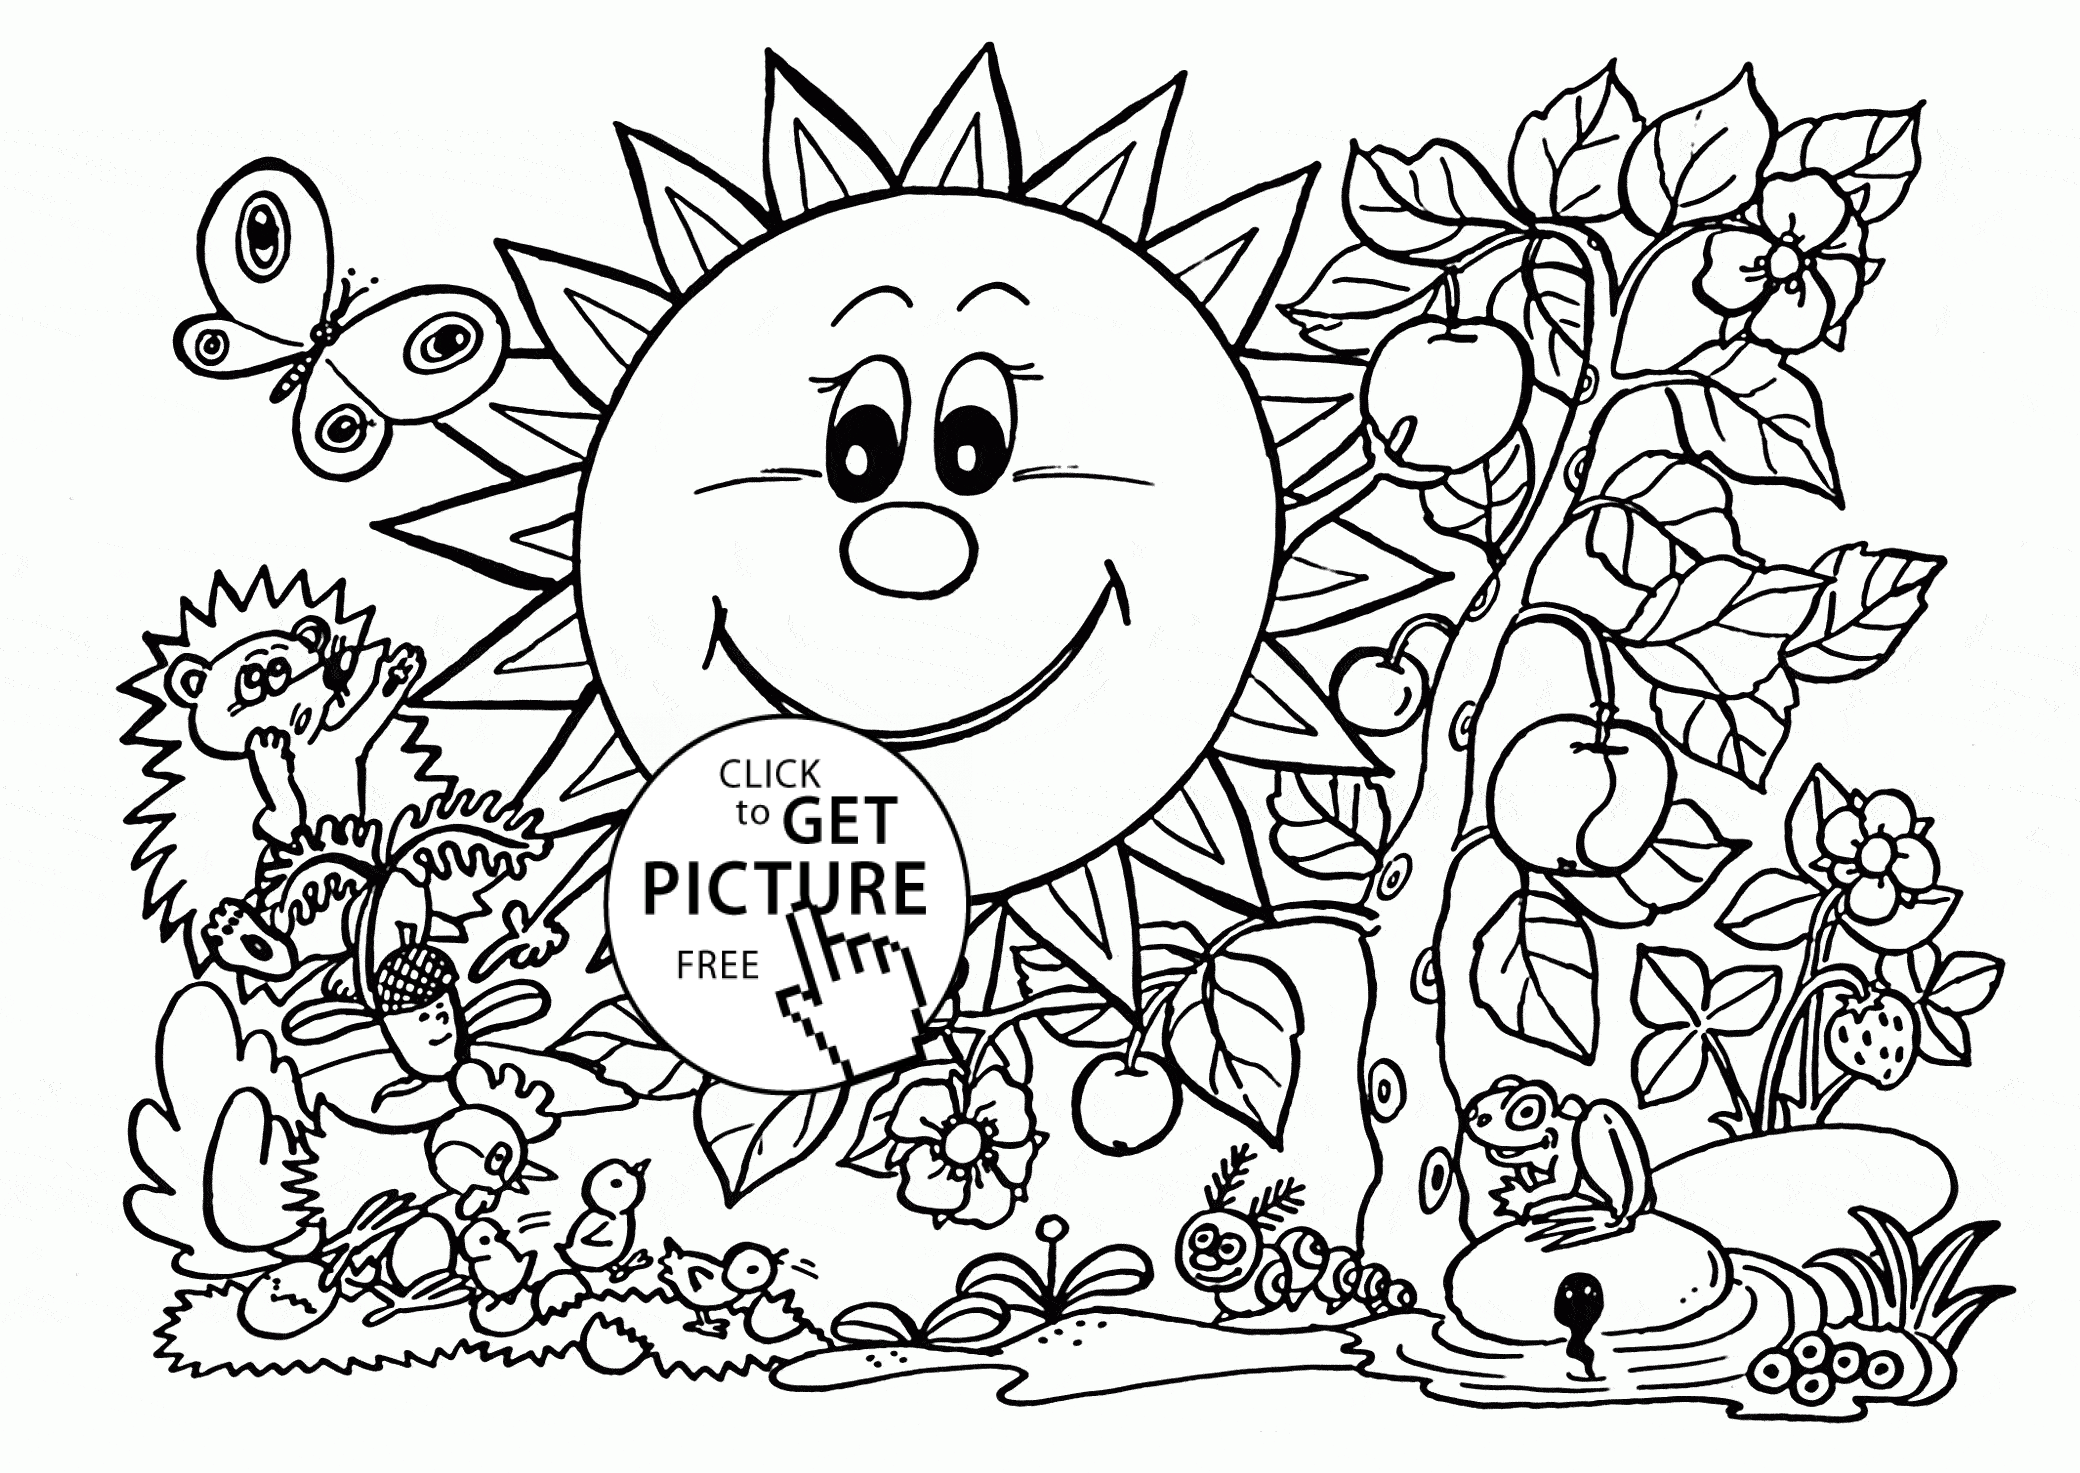 Garden Coloring Page Images For Kids - Coloring Home